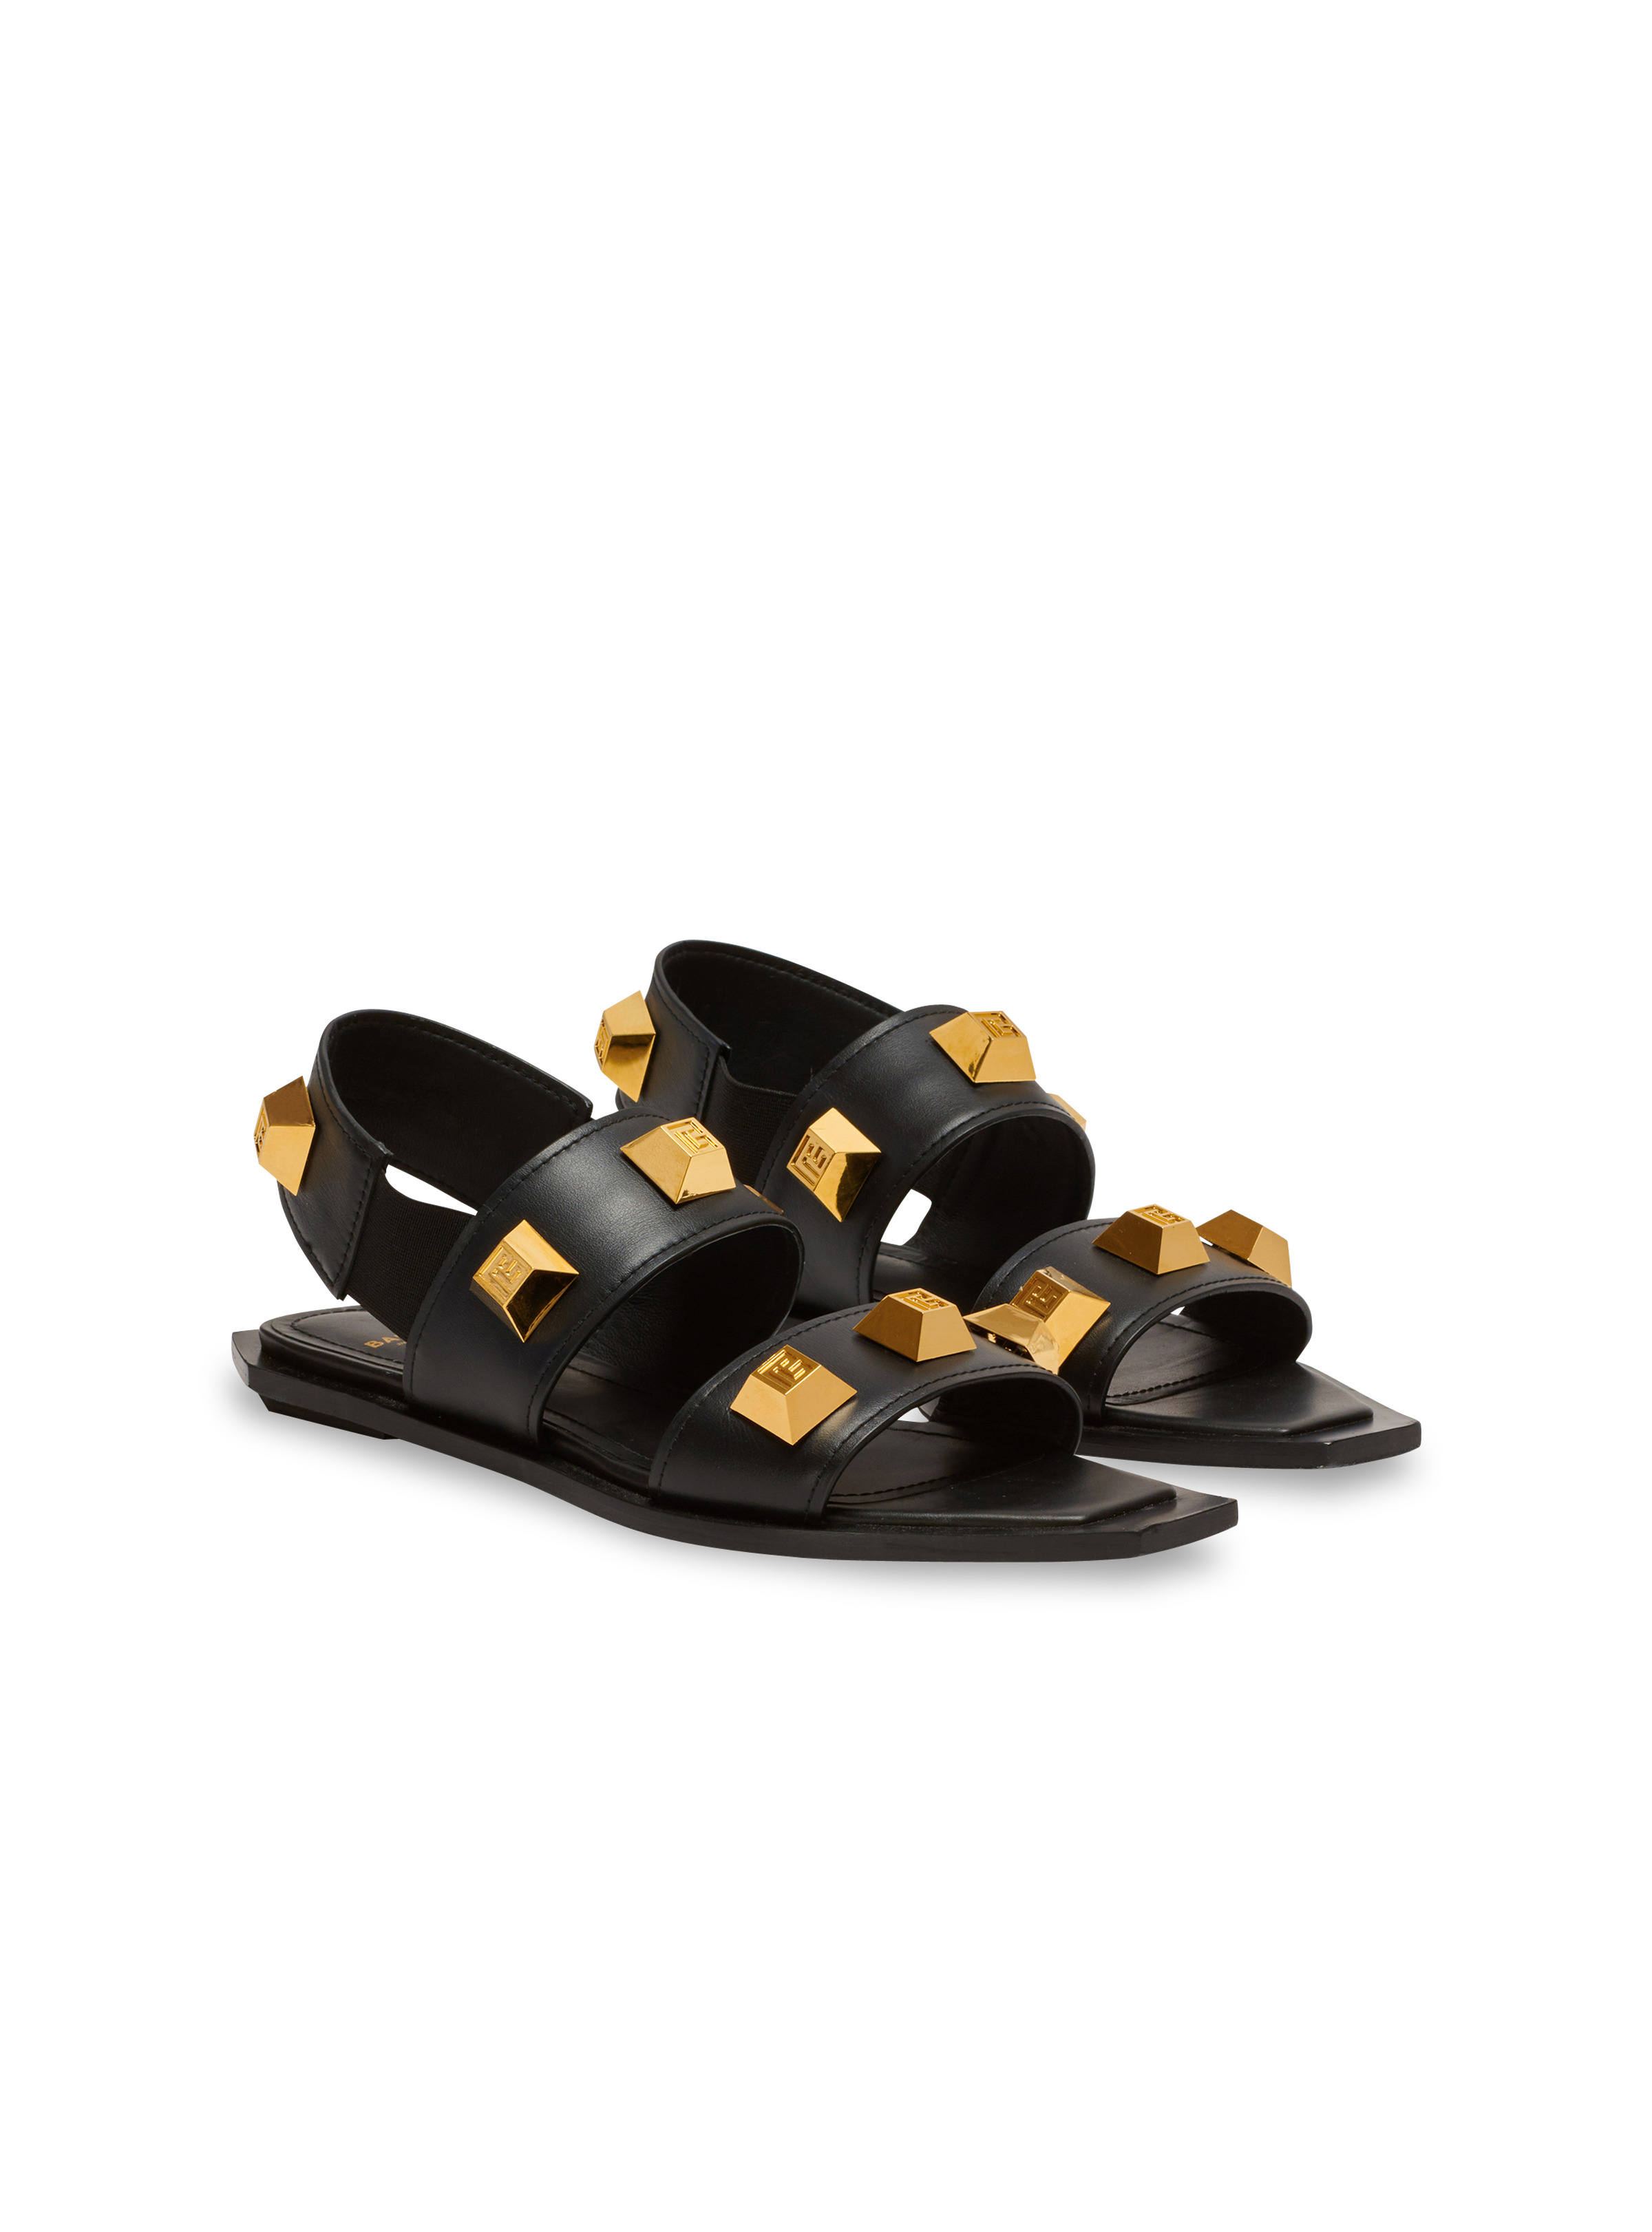 Ana leather sandals - 2